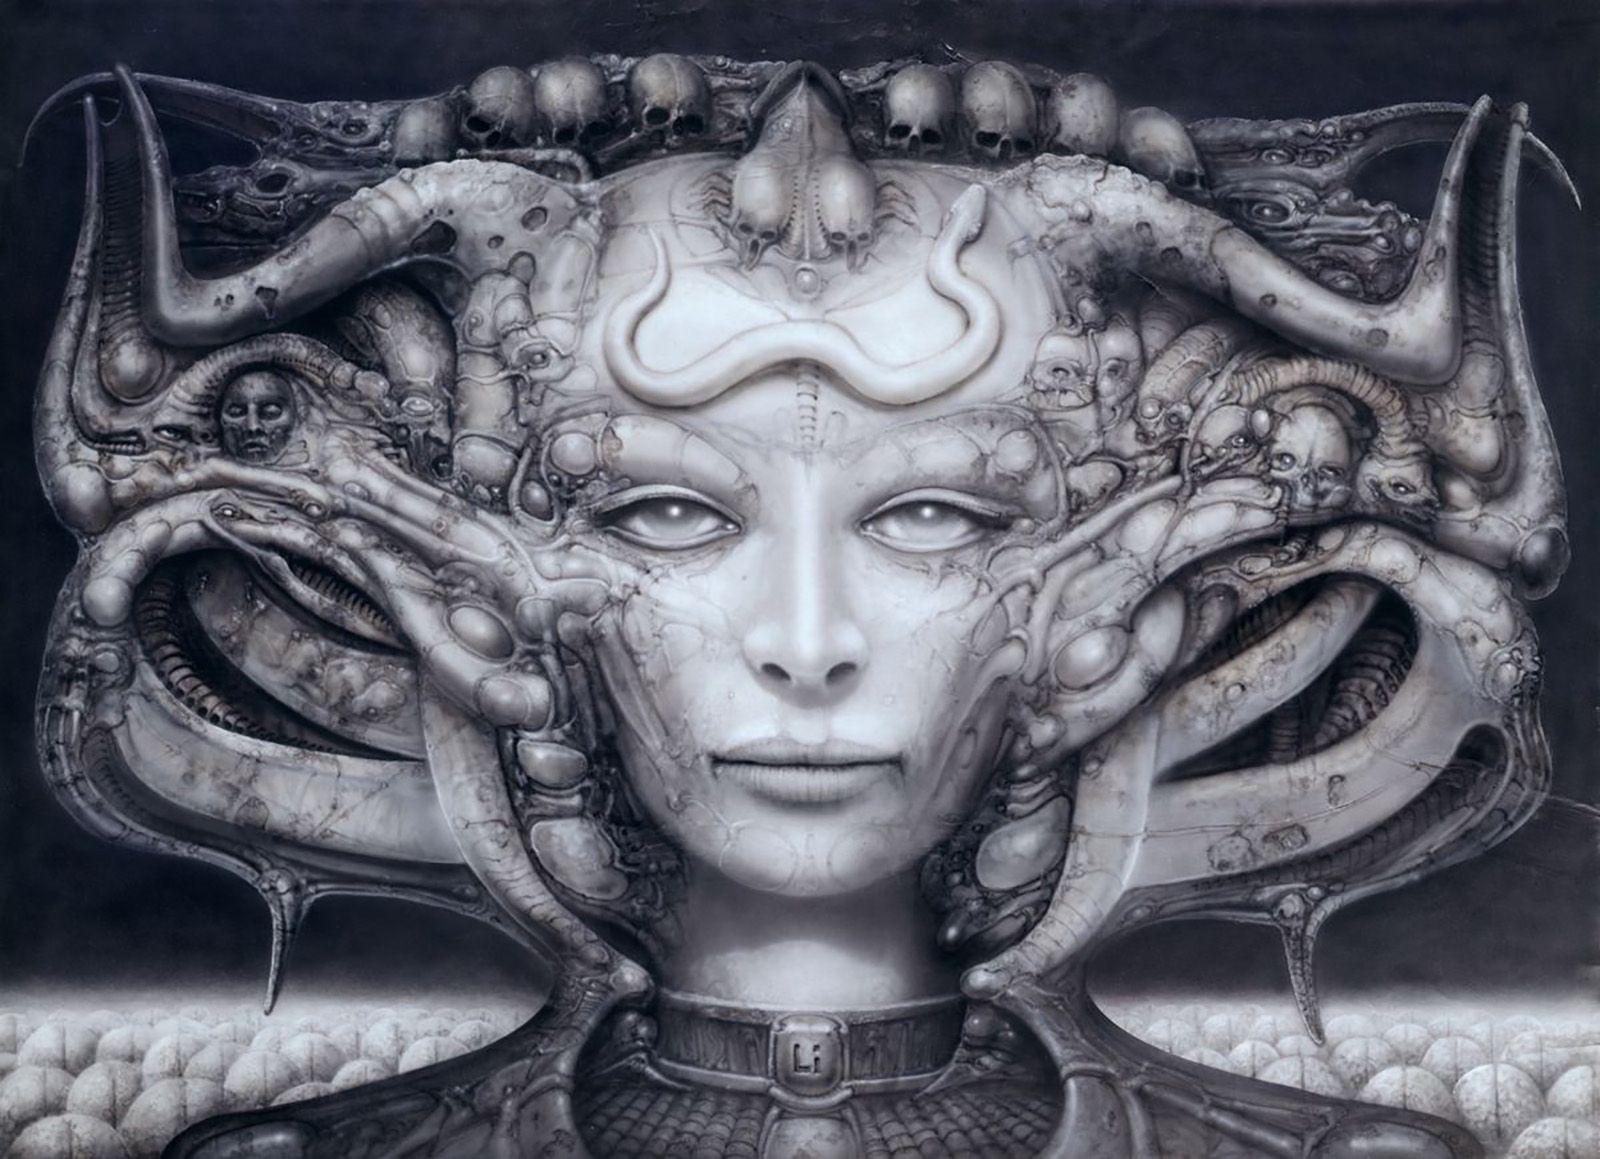 Science Fiction Wallpaper Gallery featuring H R Giger 